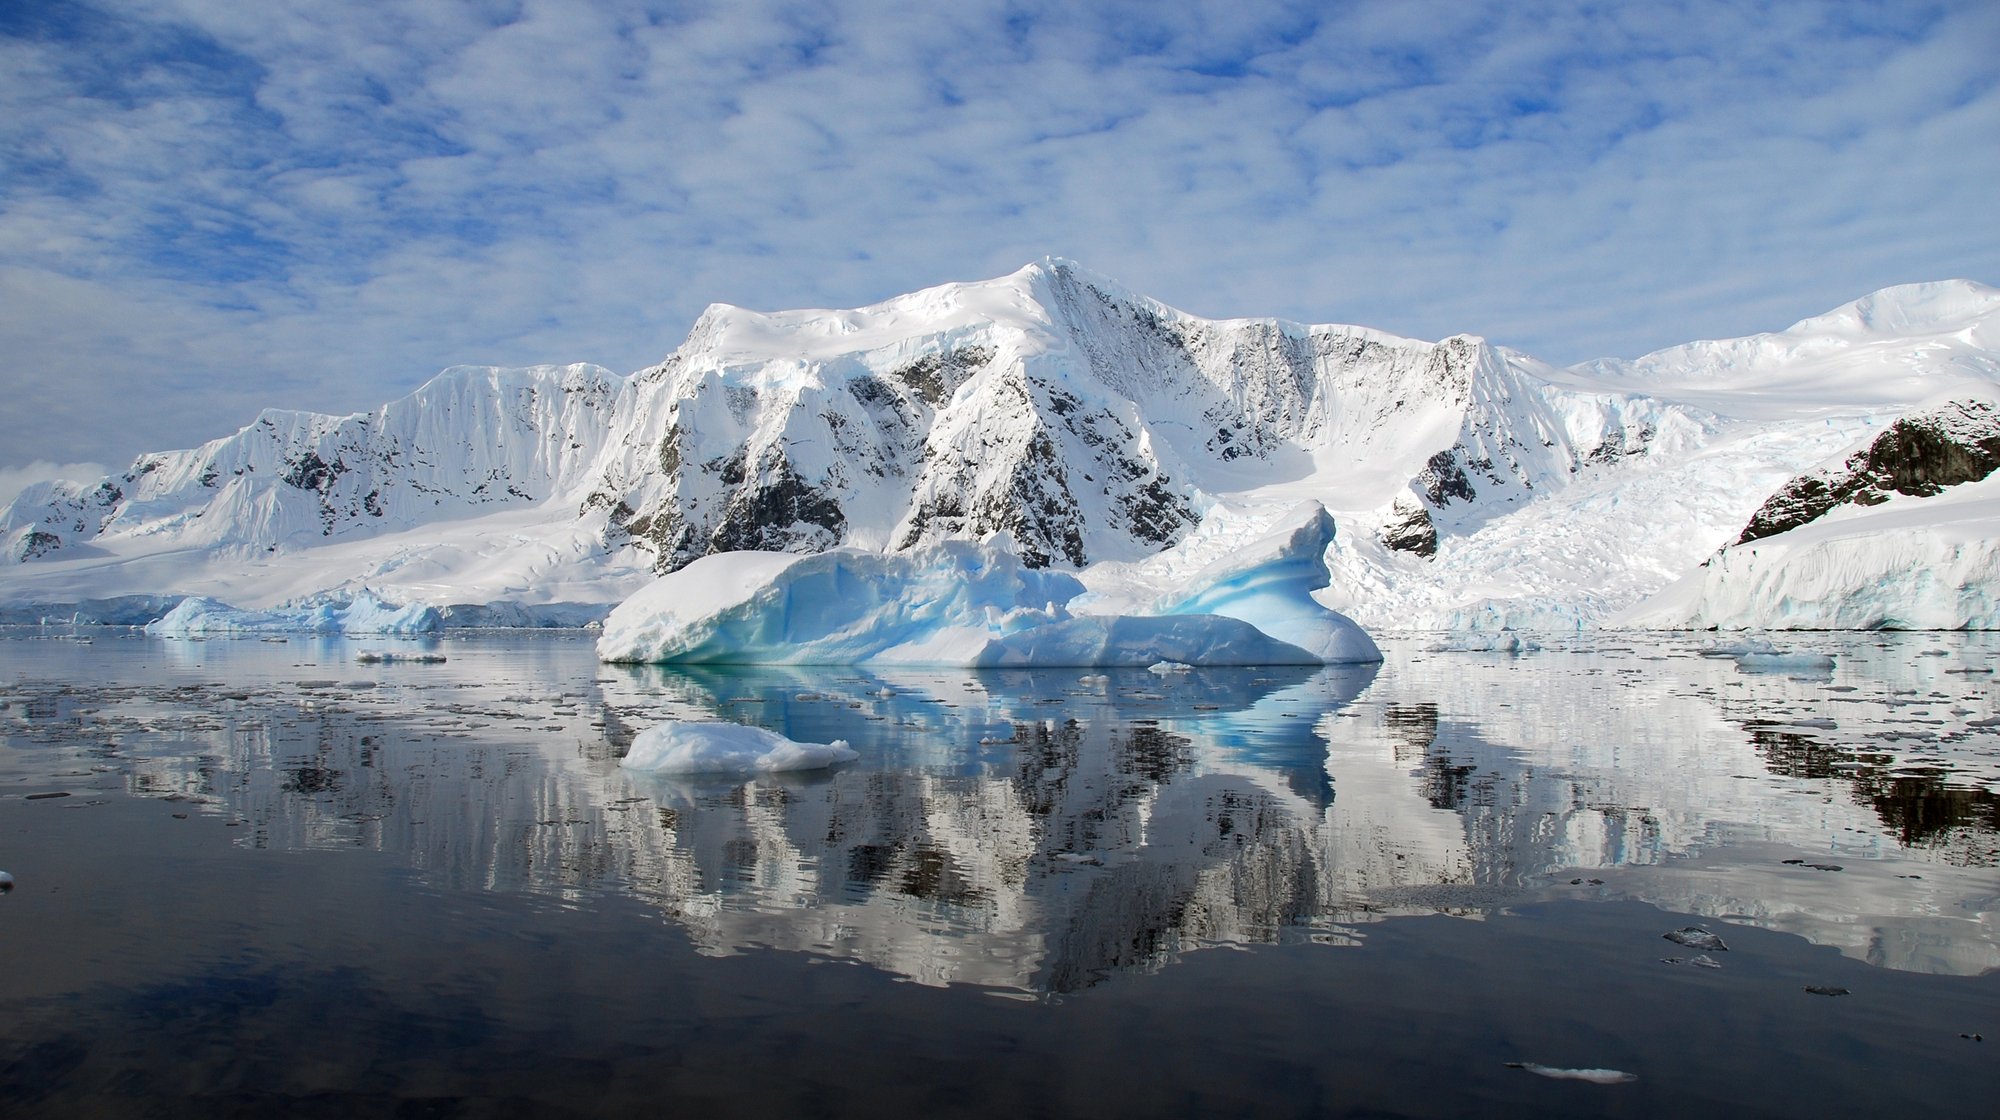 A world record temperature jump was recorded in Antarctica